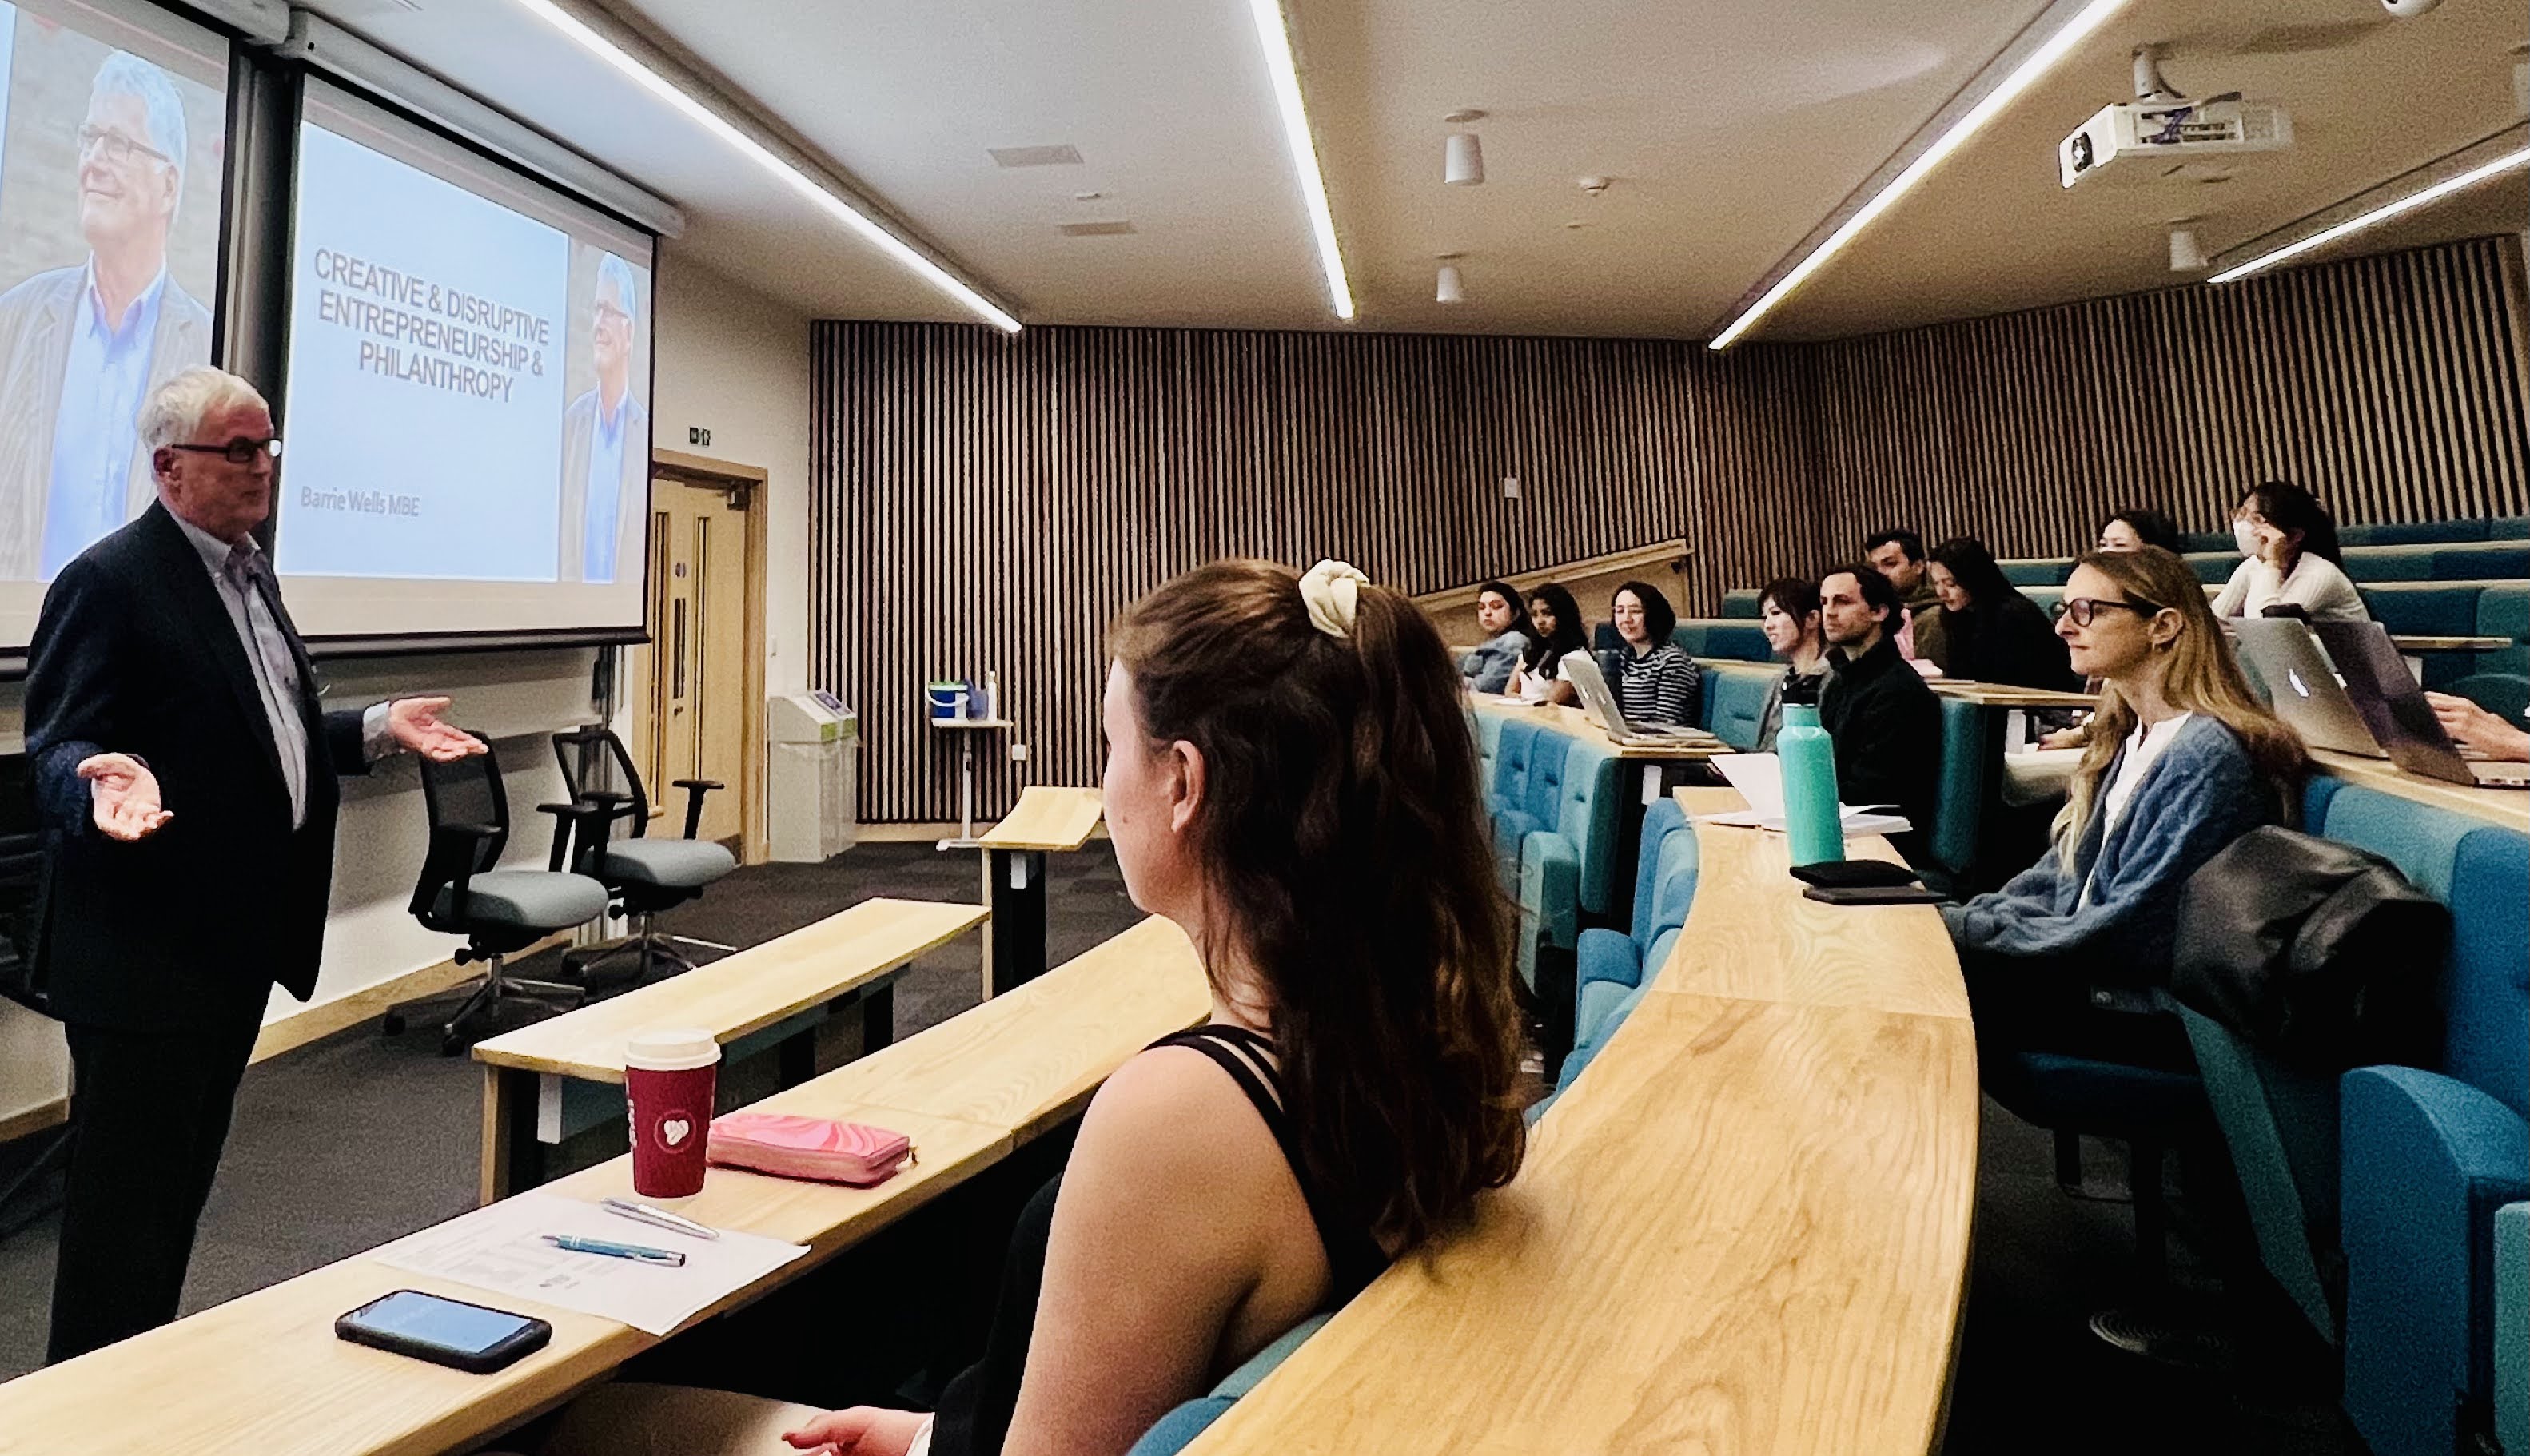 Barry Wells, Lancaster University Management School Leader in Residence, speaks to students on the MSc Digital Business, Innovation and Management programme. He is stood at the front of a leacture theatre, with students sat in curved rows of cushioned wooden seats.